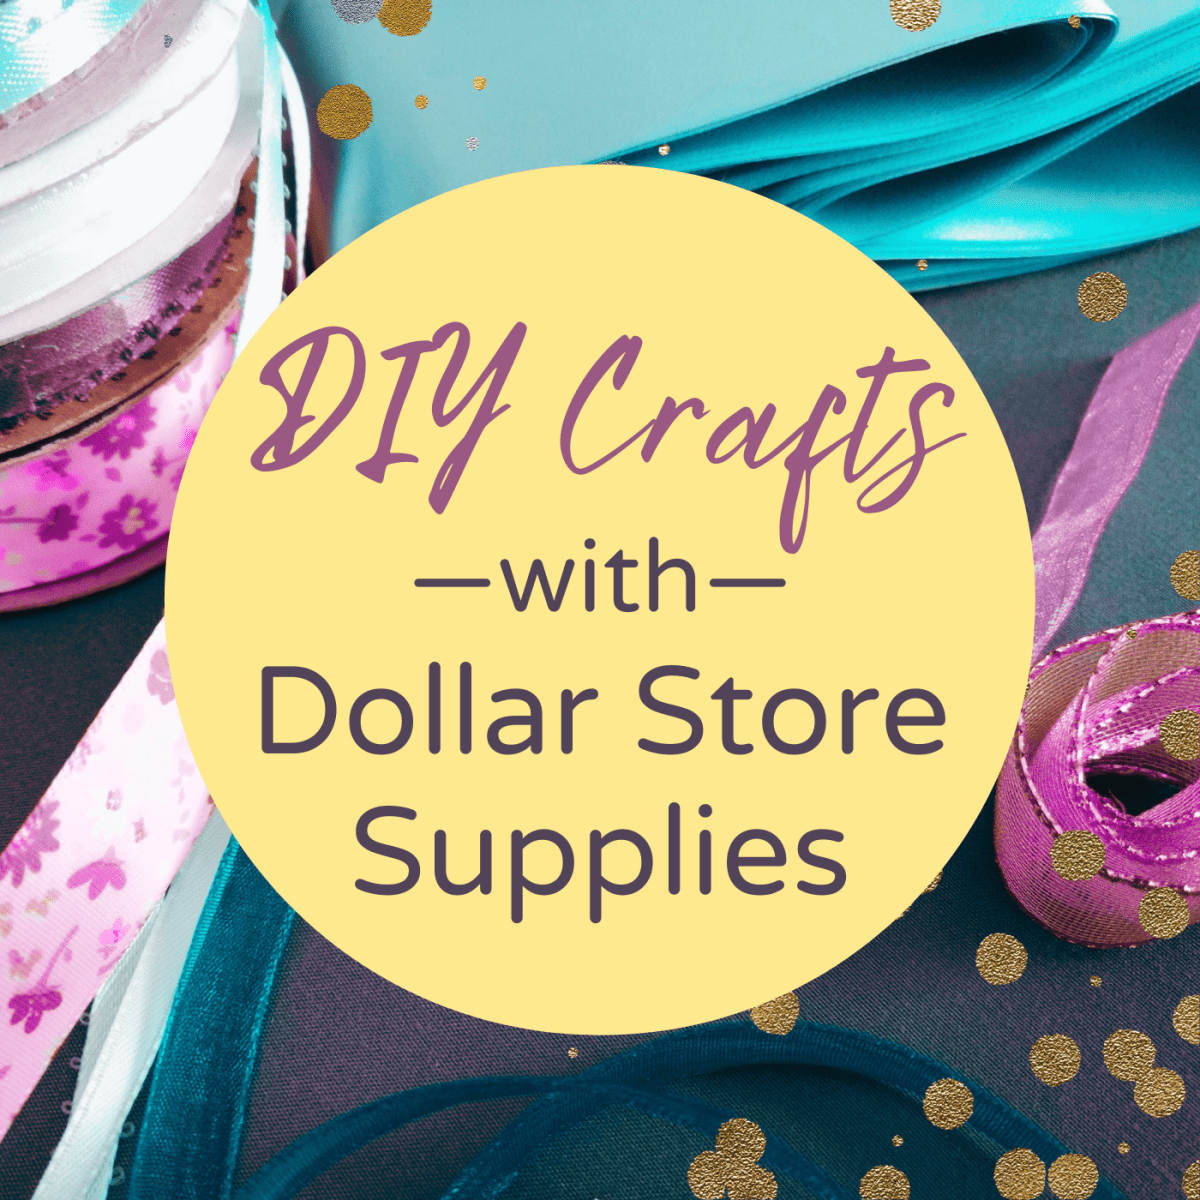 Dollar Tree Candle Making Kit: Easy $1 Crafting!